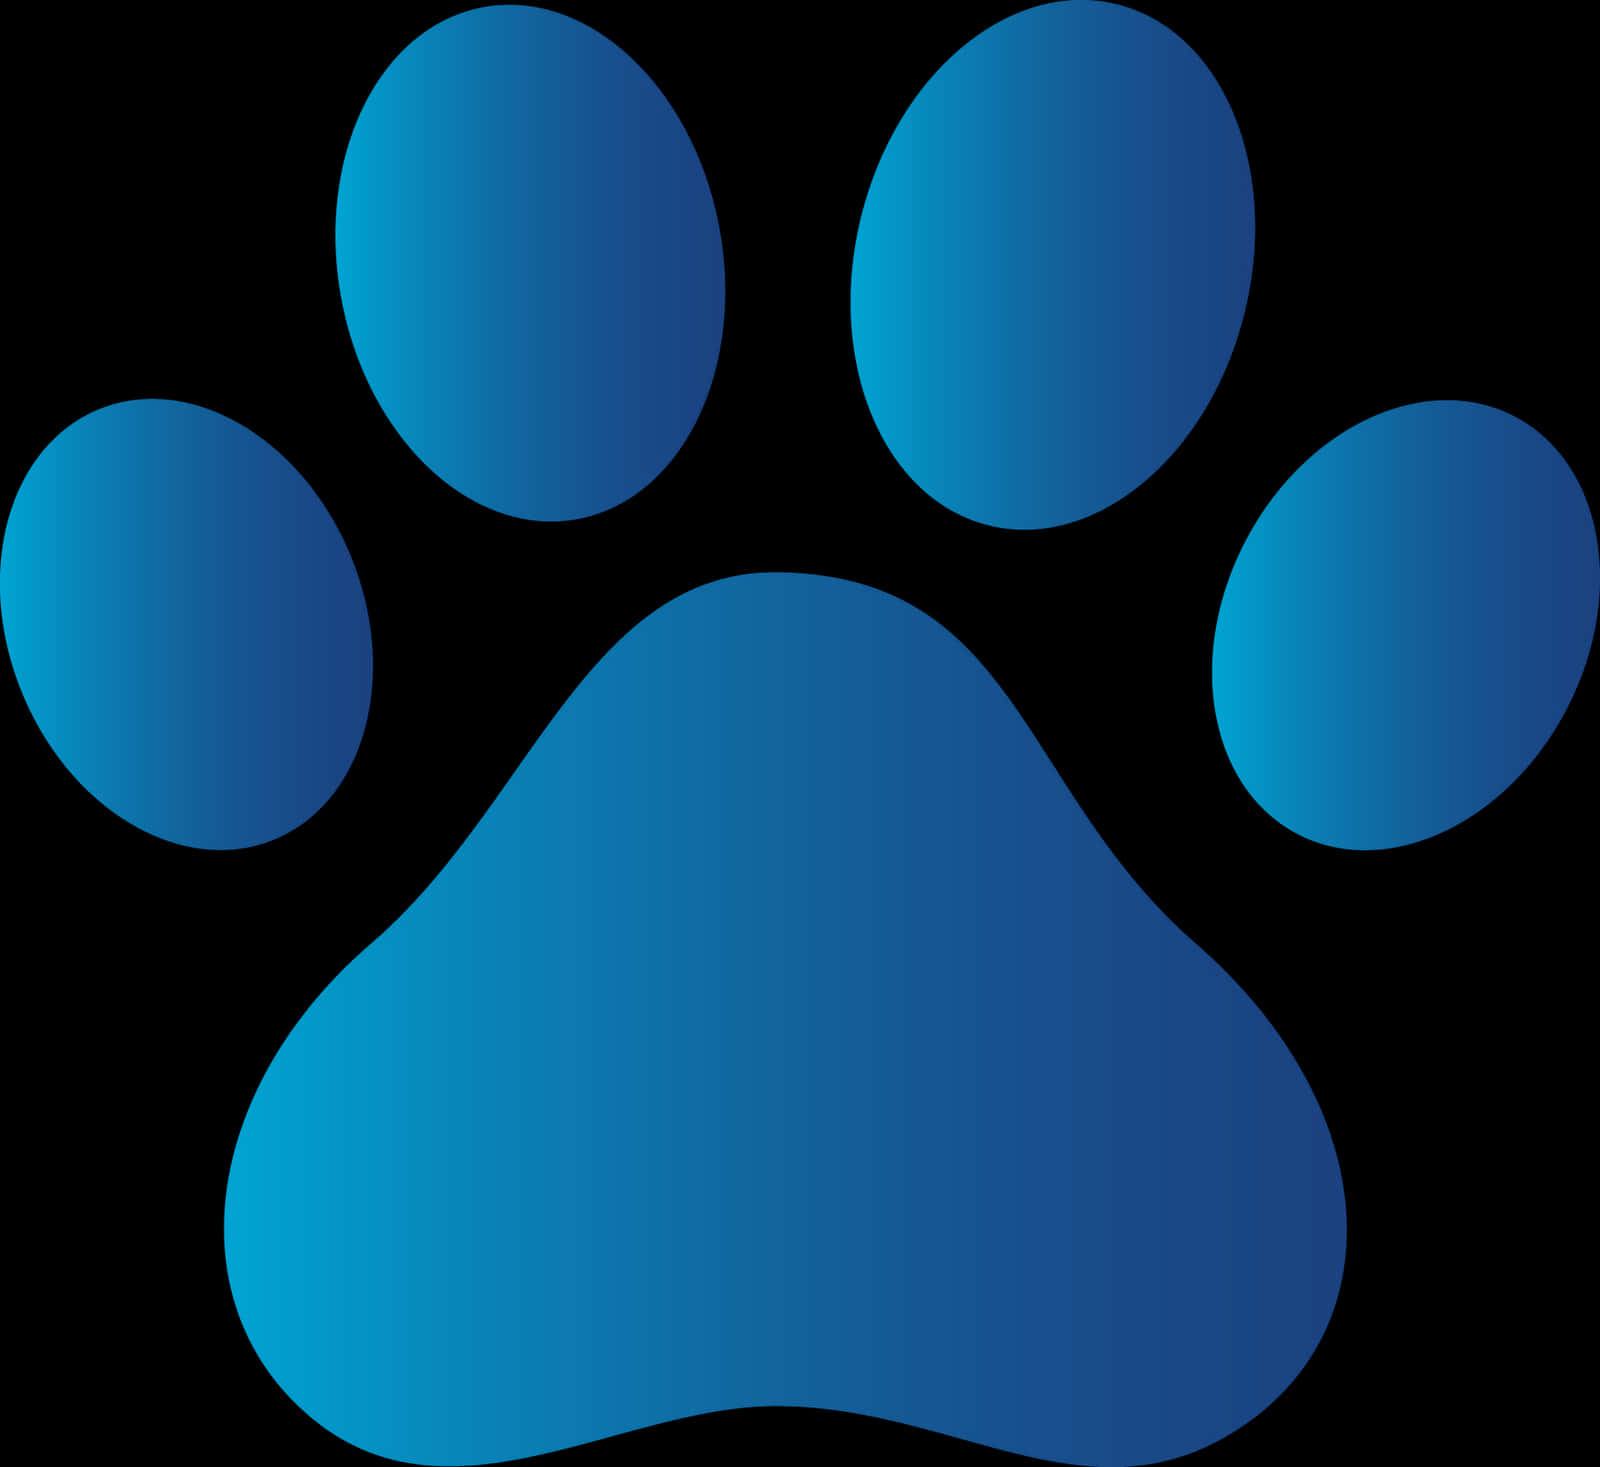 Blue Dog Paw Print Graphic PNG